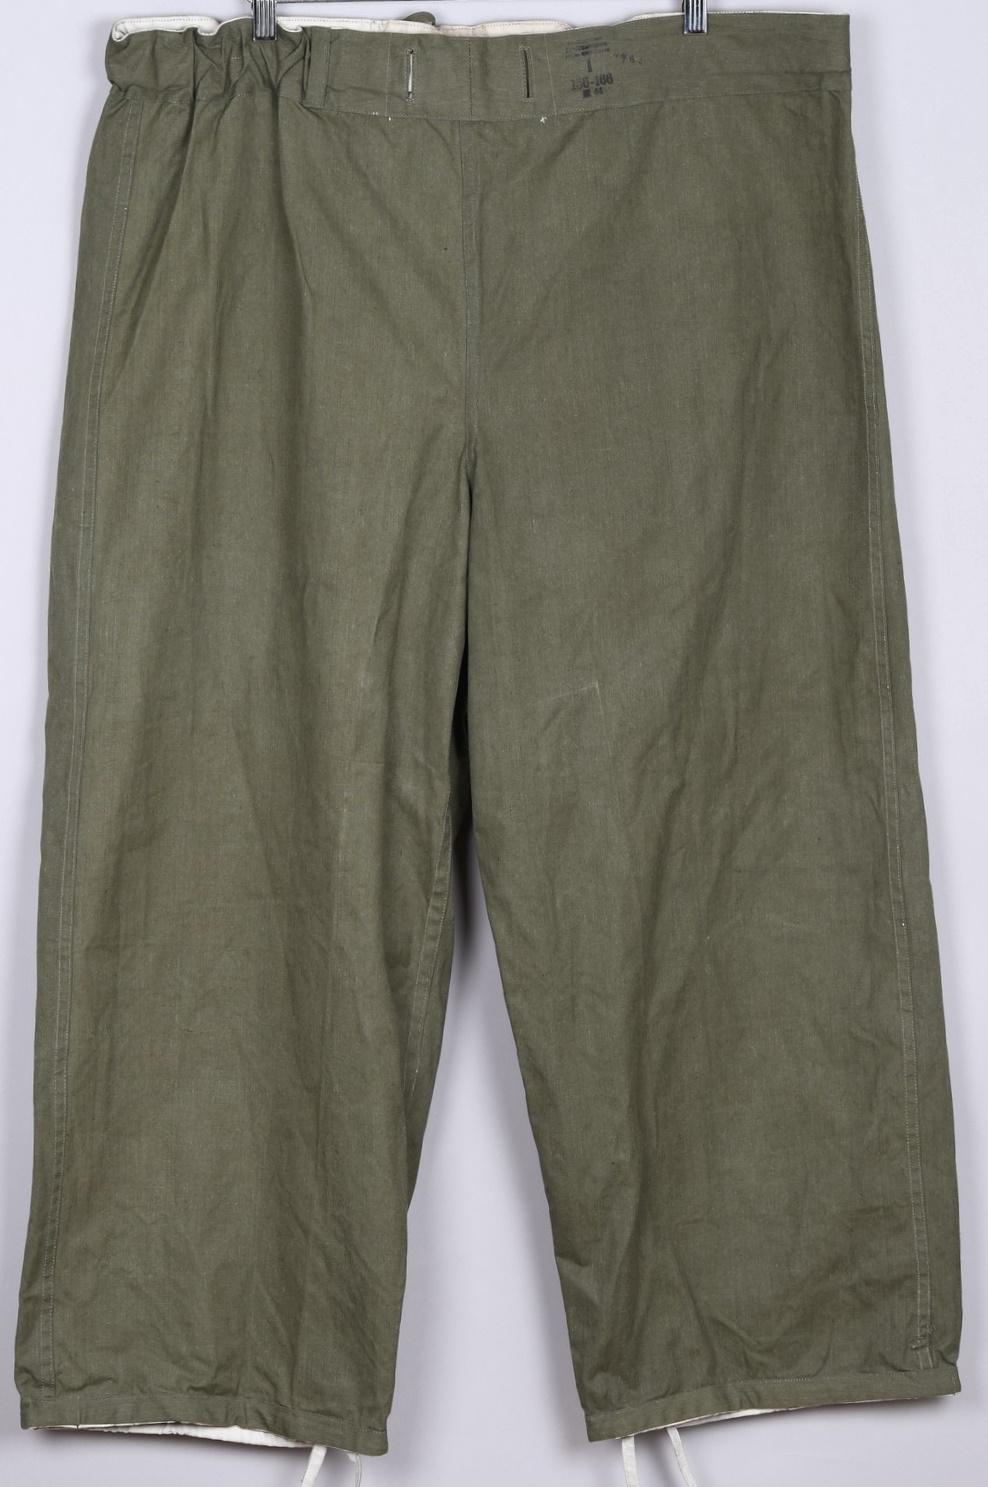 Gebirgsjäger Camouflage Wind Pants Fully Reversible to White